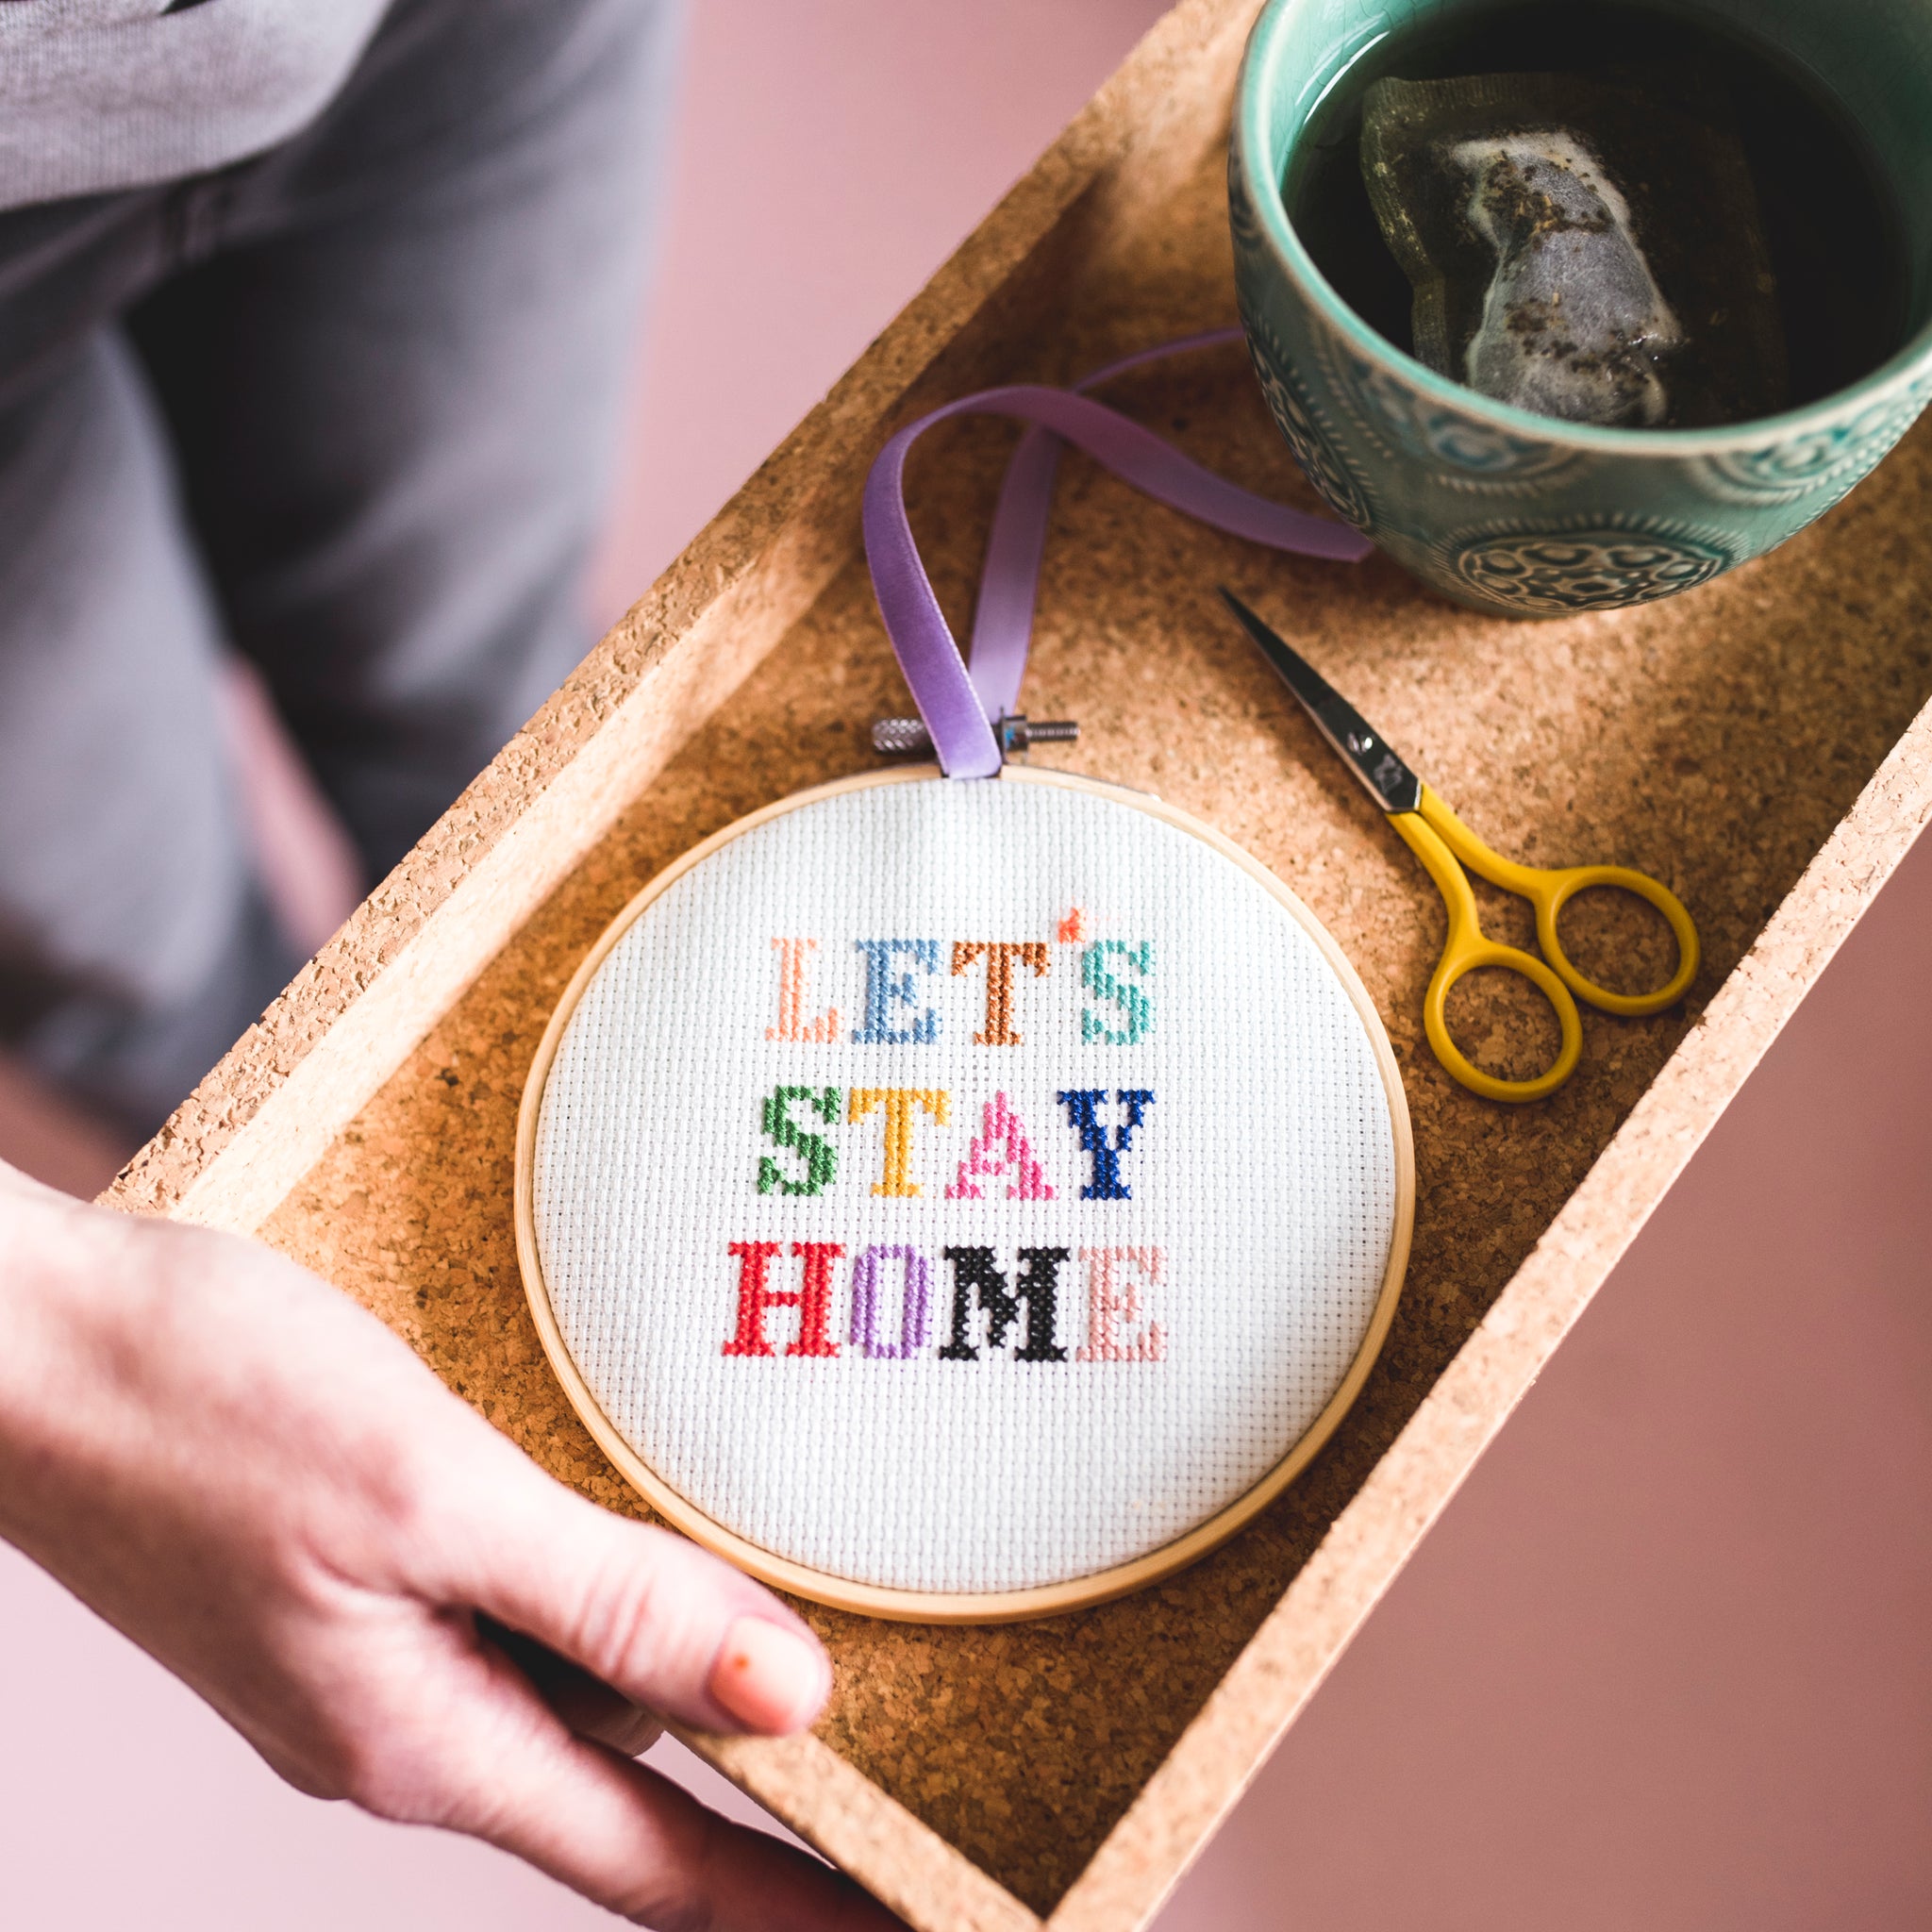 Let's Stay Home - I Heart Stitch Art Embroidery Kit